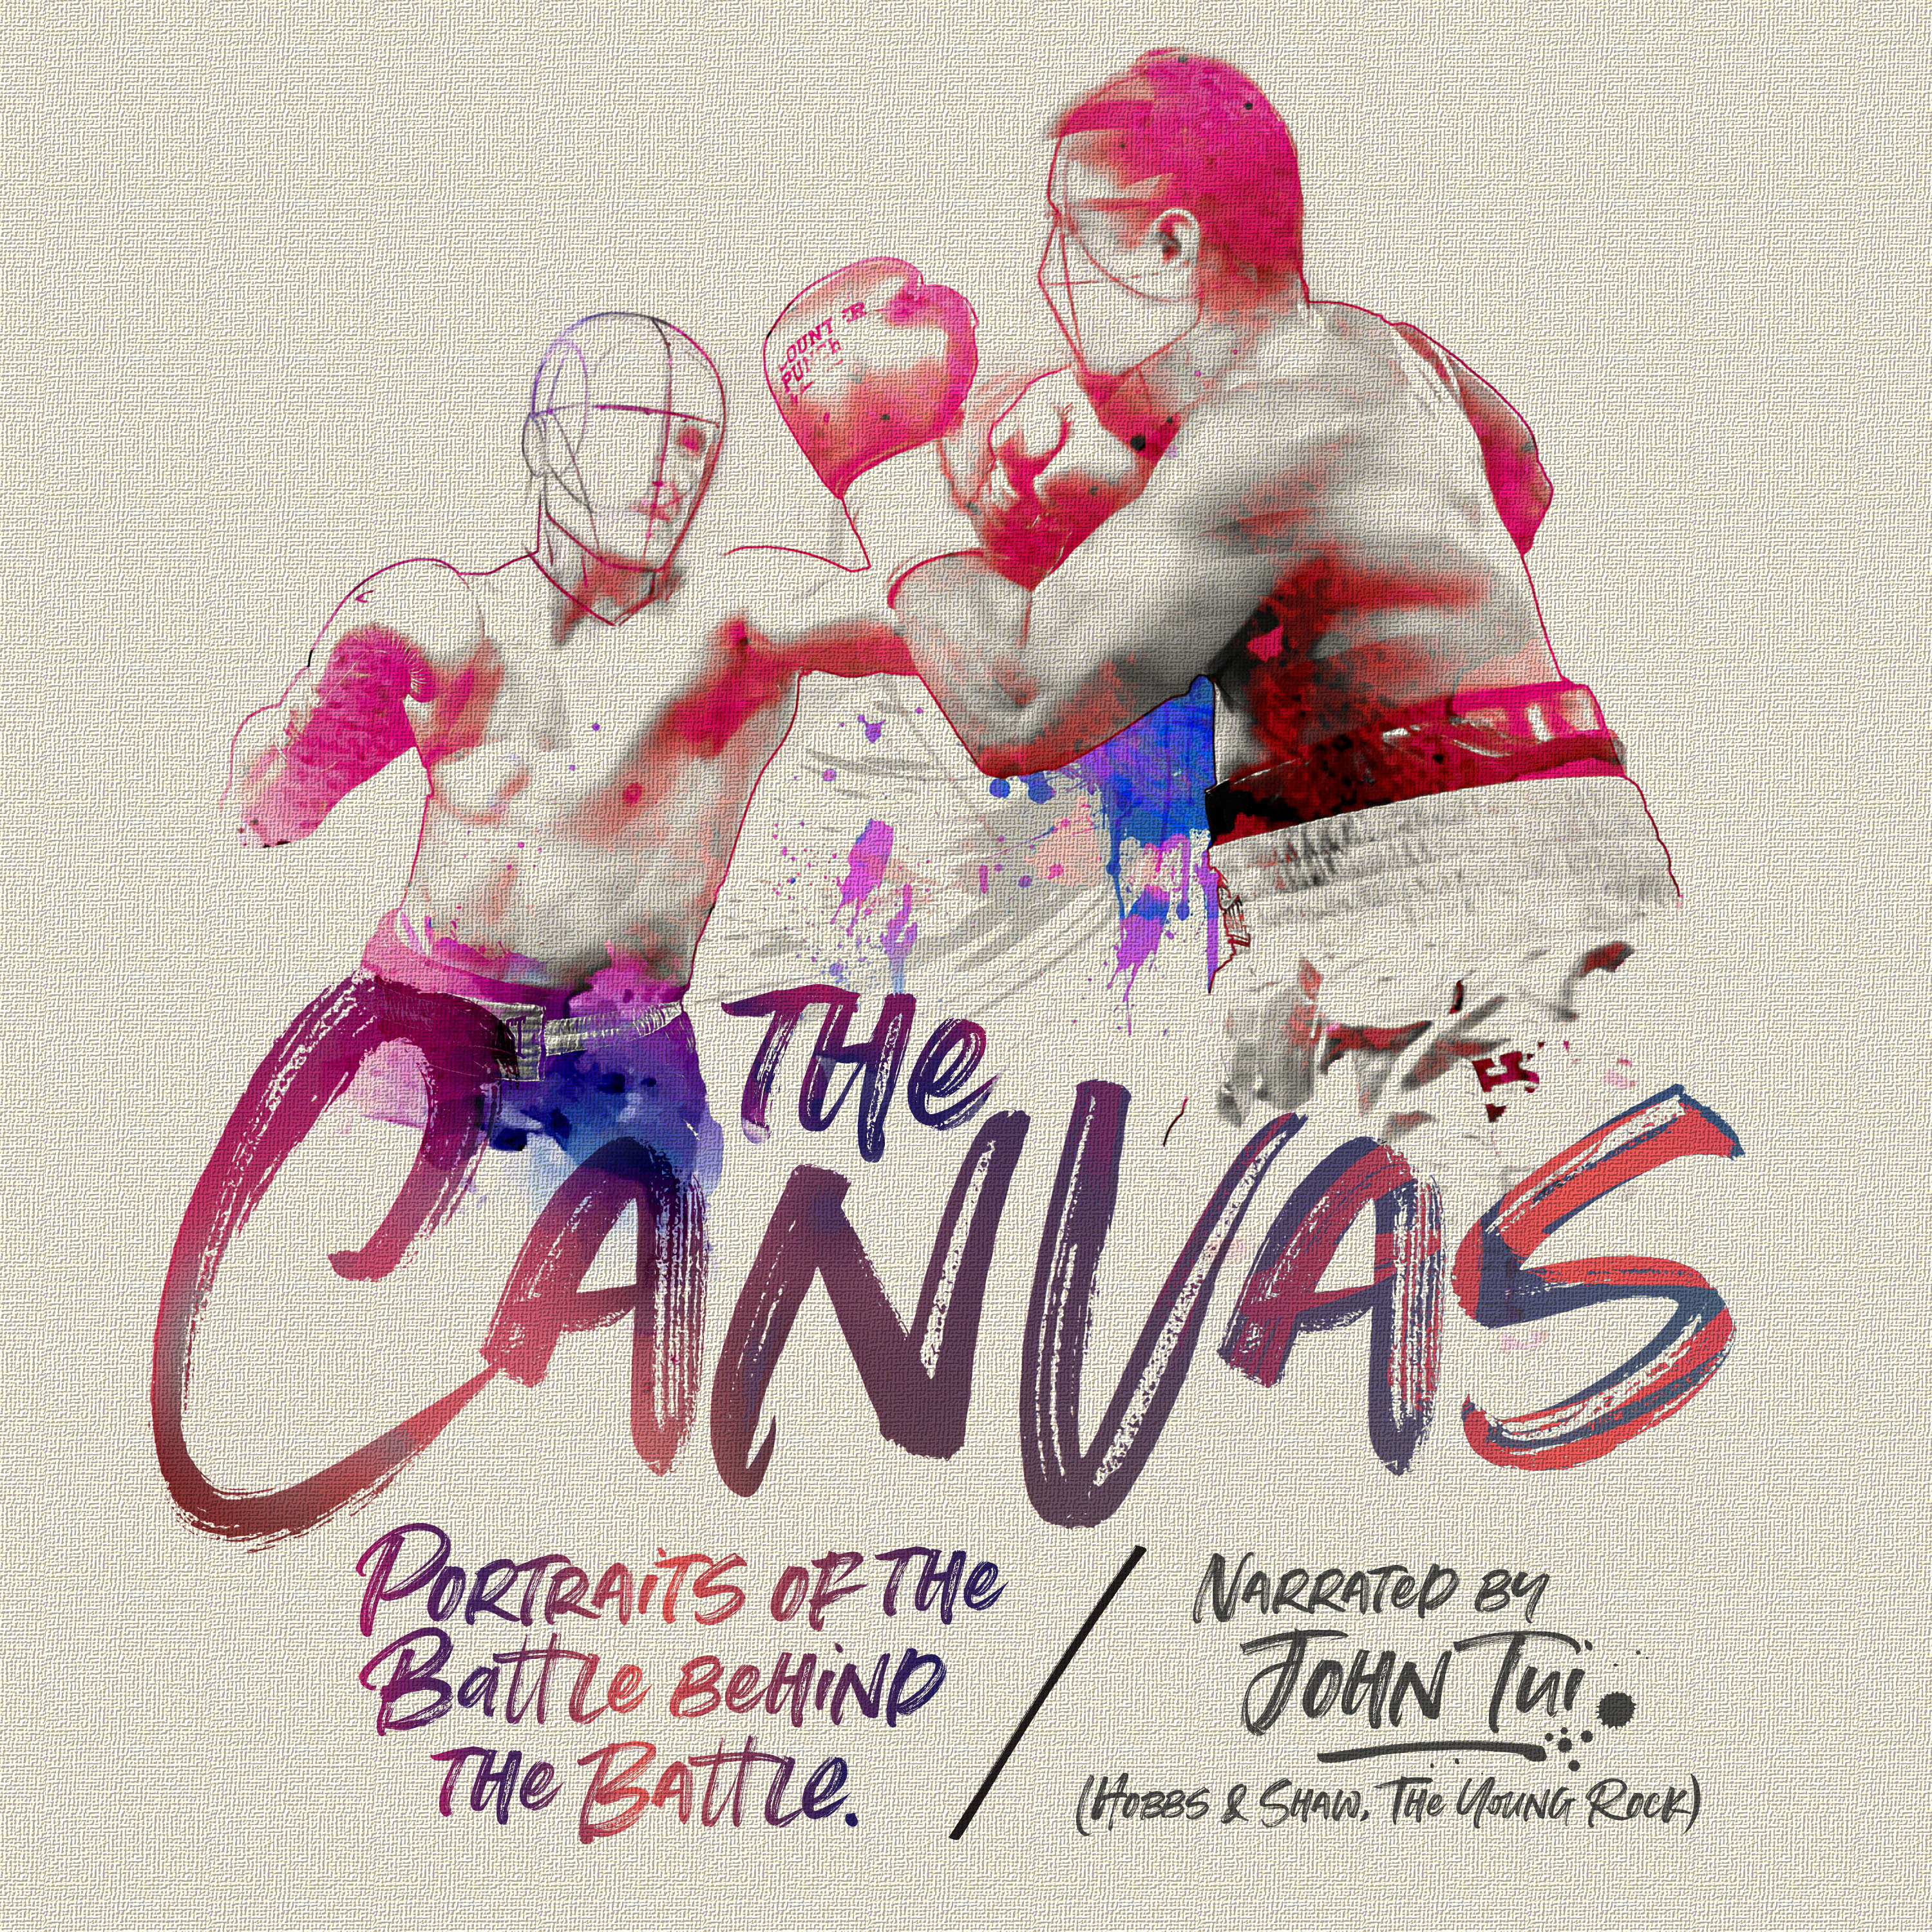 Duncan recommends "The Canvas" Round 1: DAVID ‘THE GREAT WHITE’ LIGHT